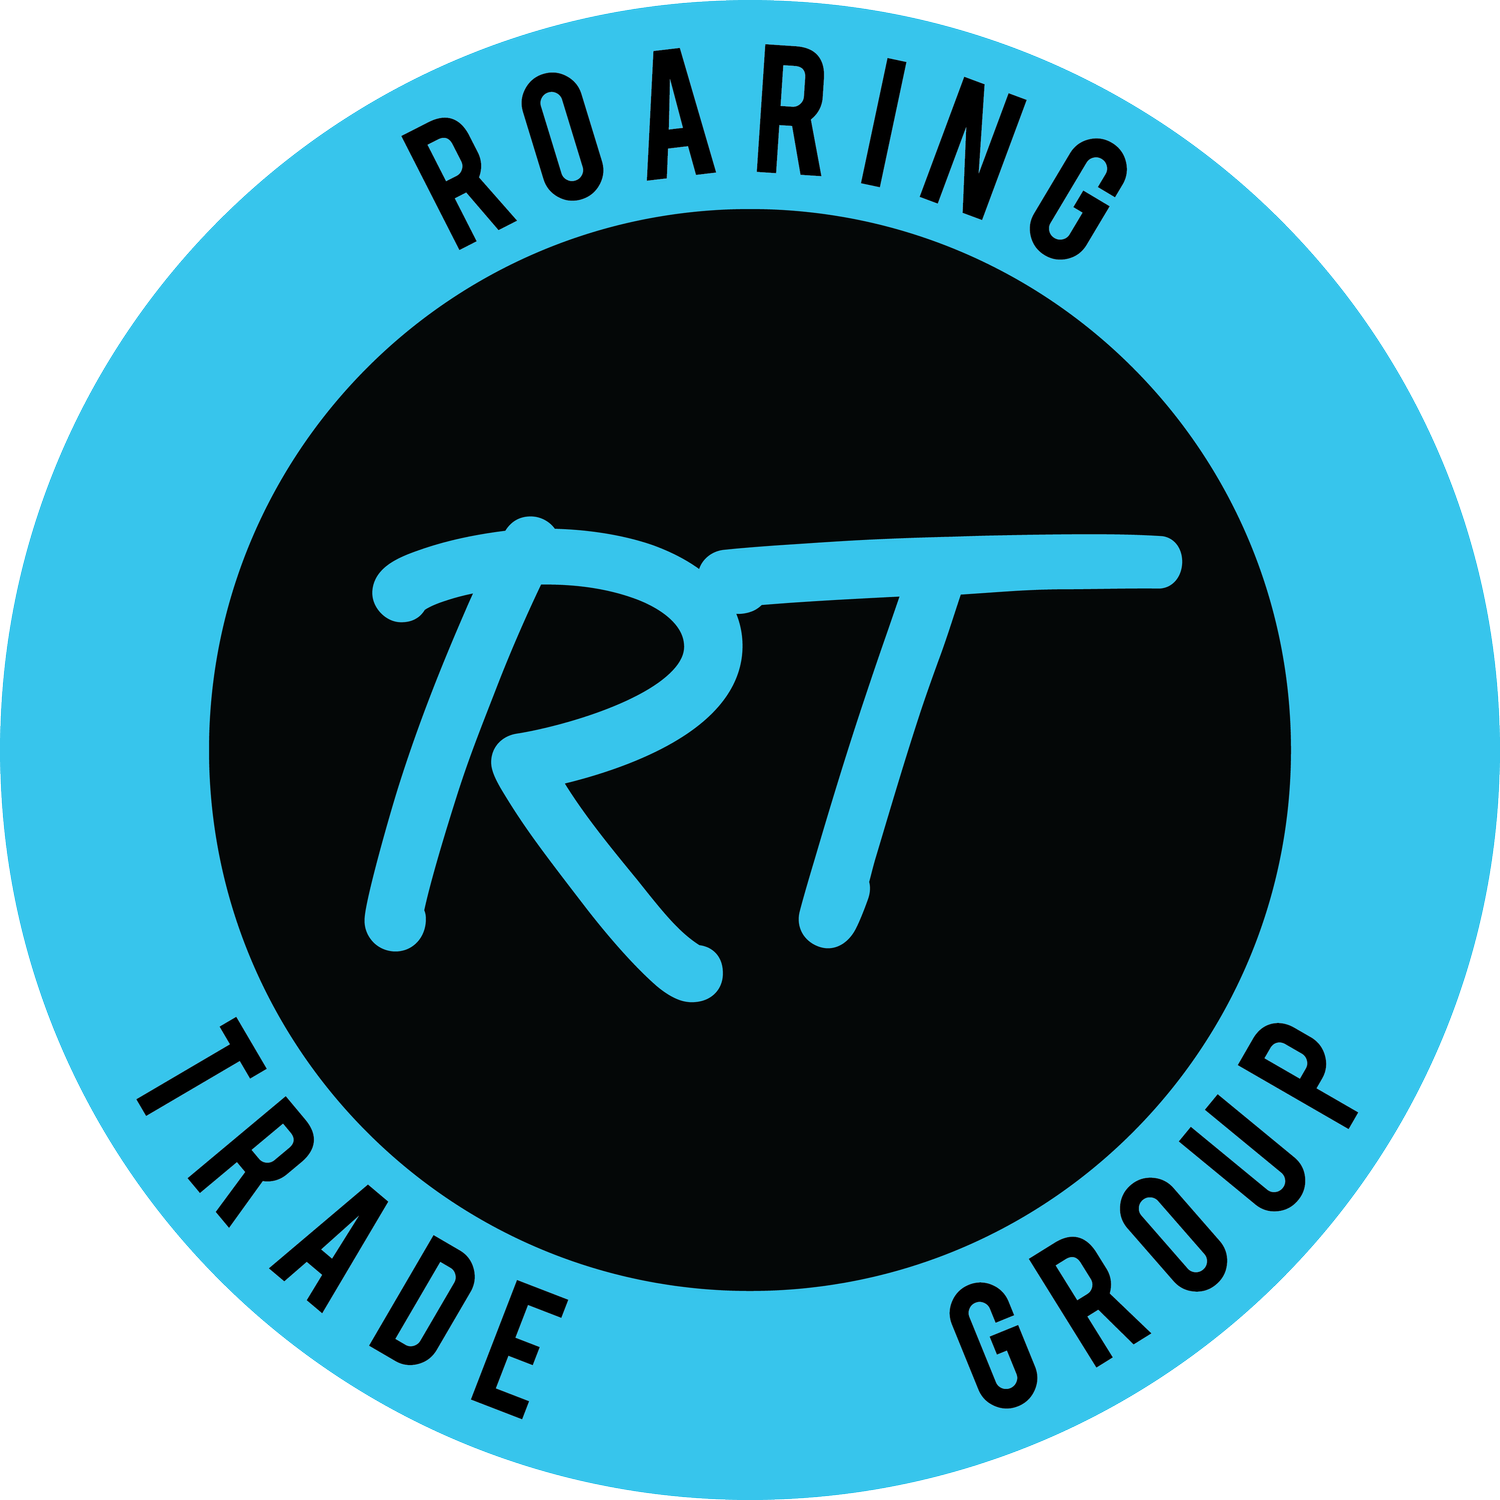 Roaring Trade Group | Professional Trade Services for Real Estate Agents